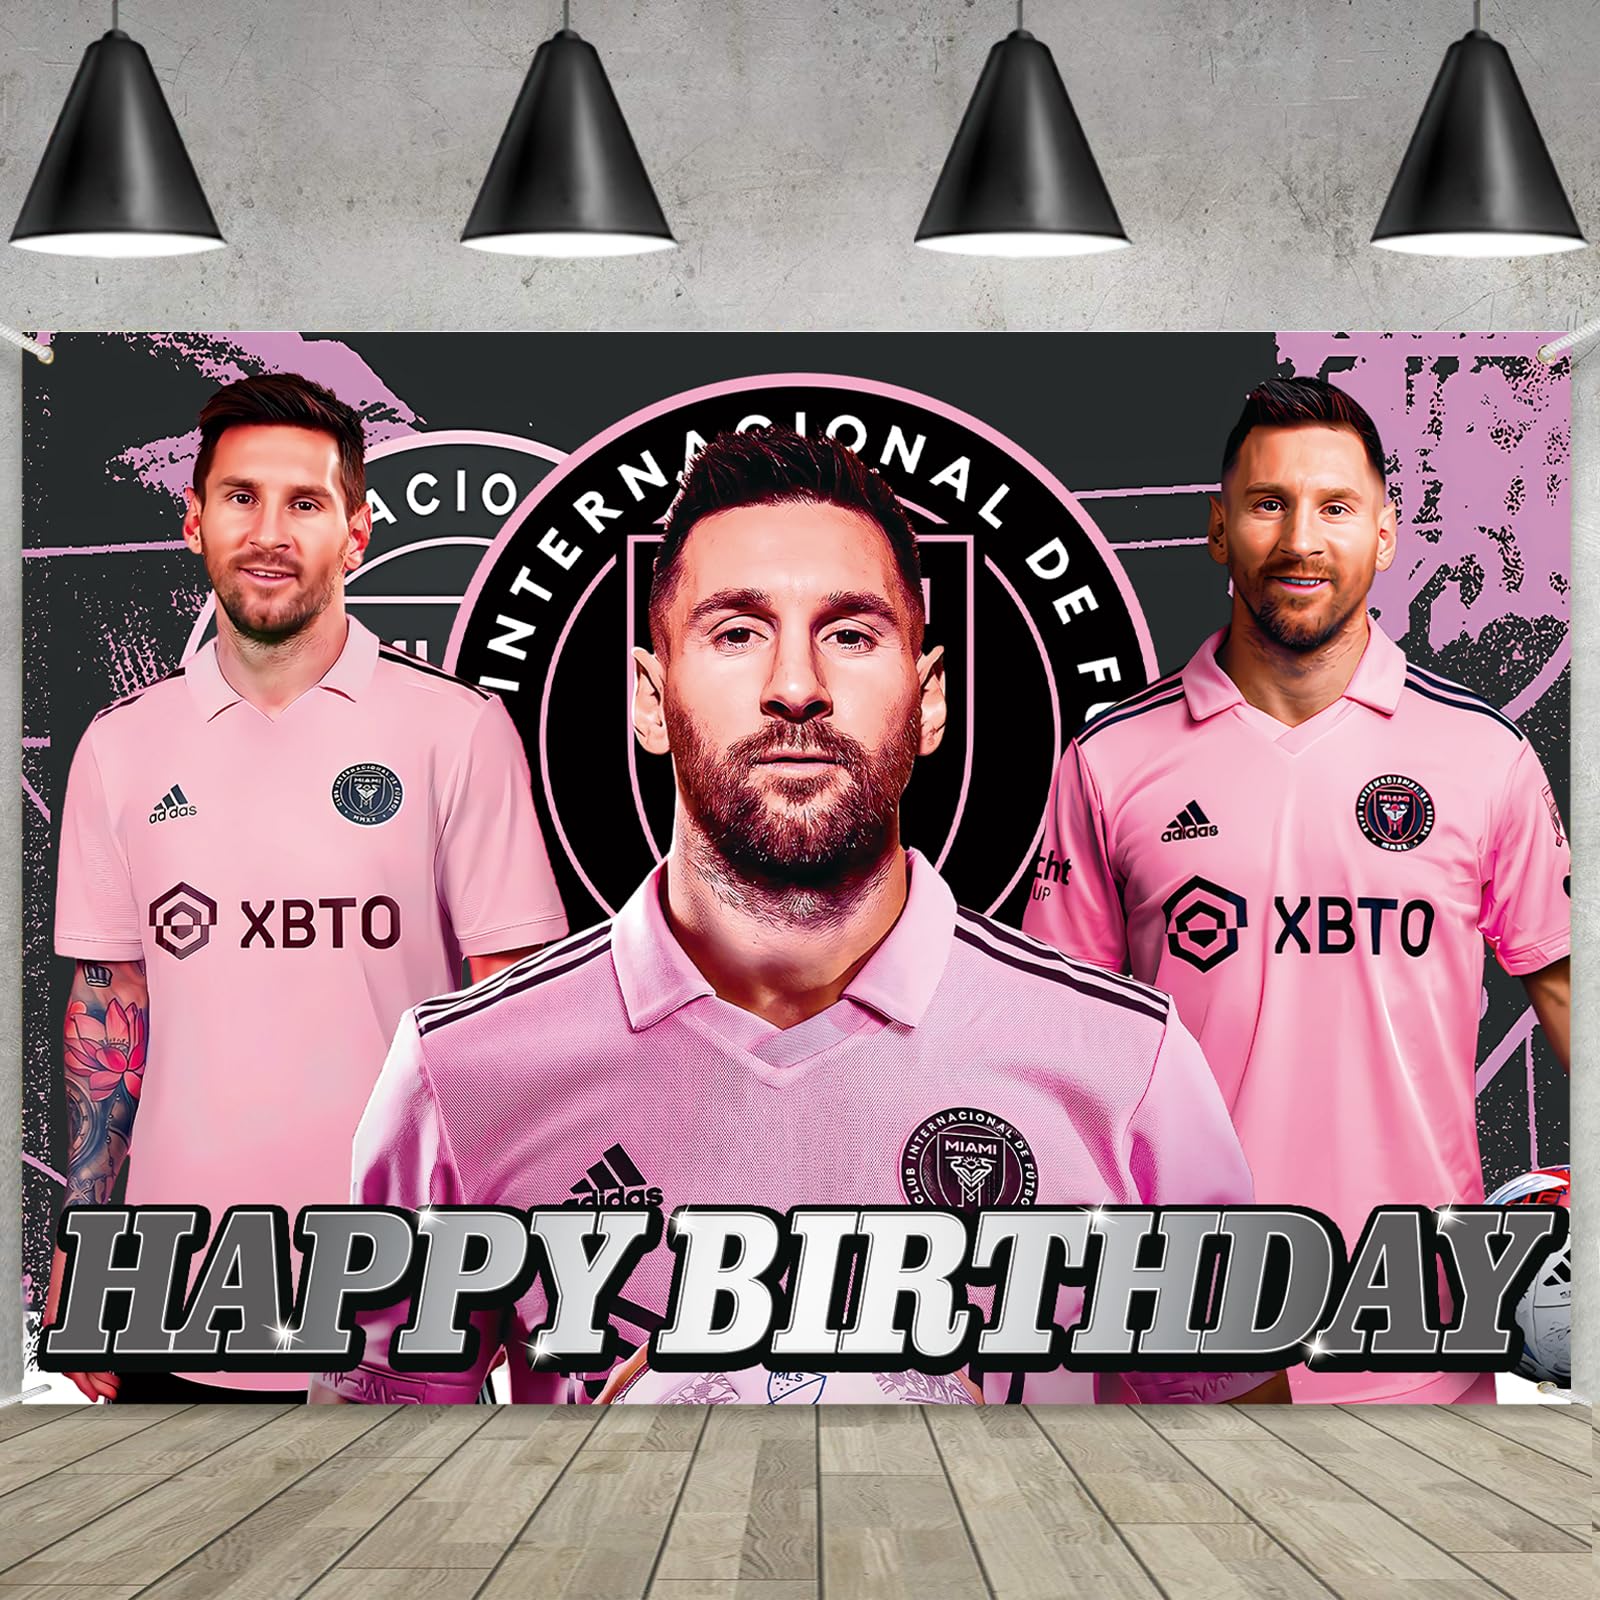 Soccer Star 𝓜𝓮𝓼𝓼𝓲 Birthday Party Supplies, Happy Birthday Backdrop for Miami CF Theme Party, 5 x 3 FT Soccer Birthday Banner for Girls Boys Fans Football Birthday Party Decorations